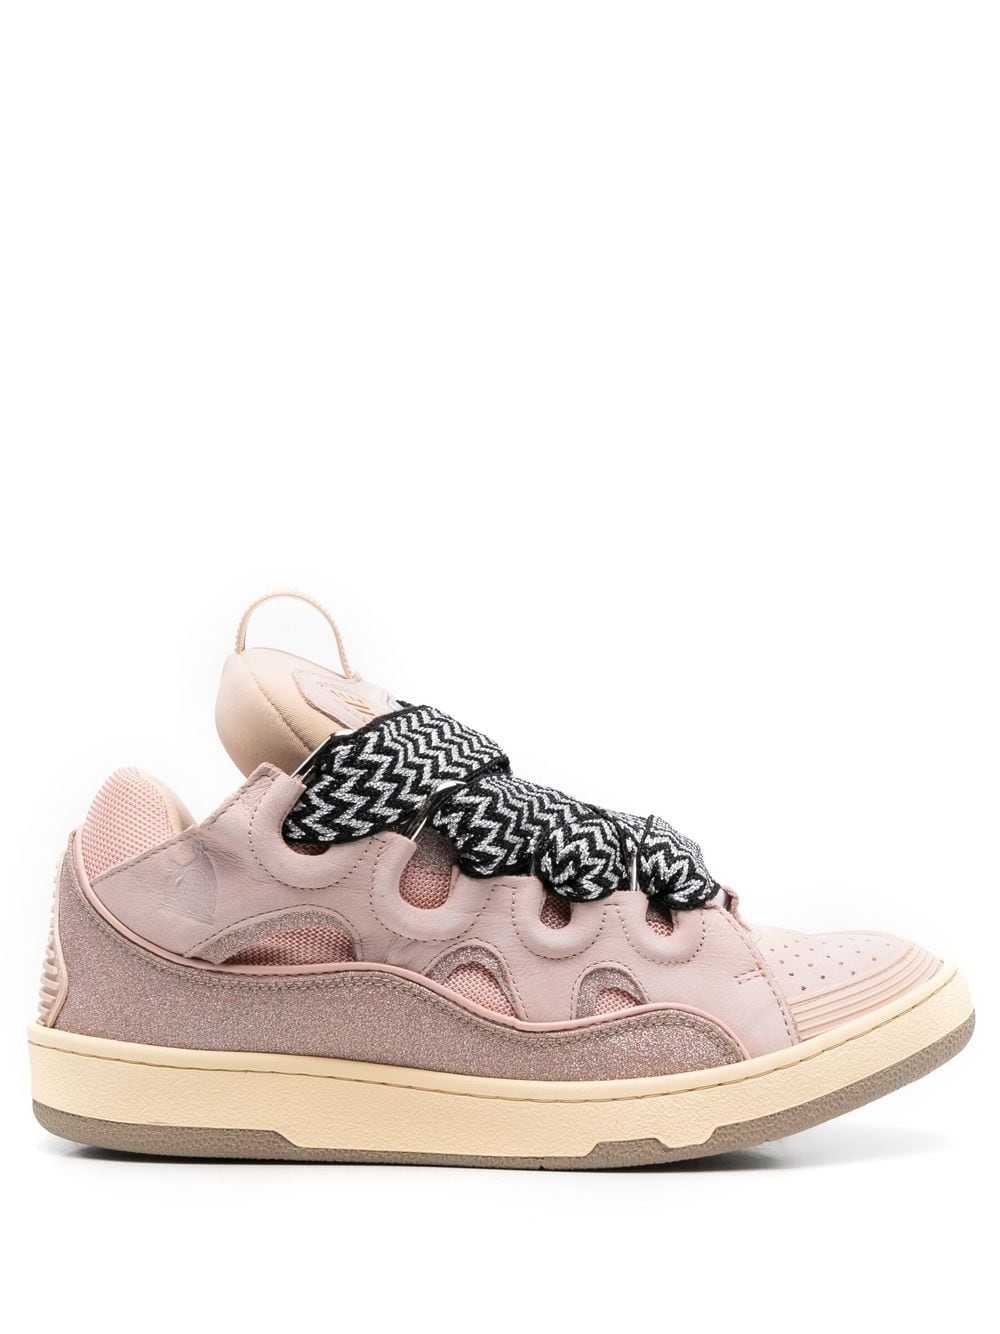 Lanvin lace-up low-top Sneakers - Farfetch